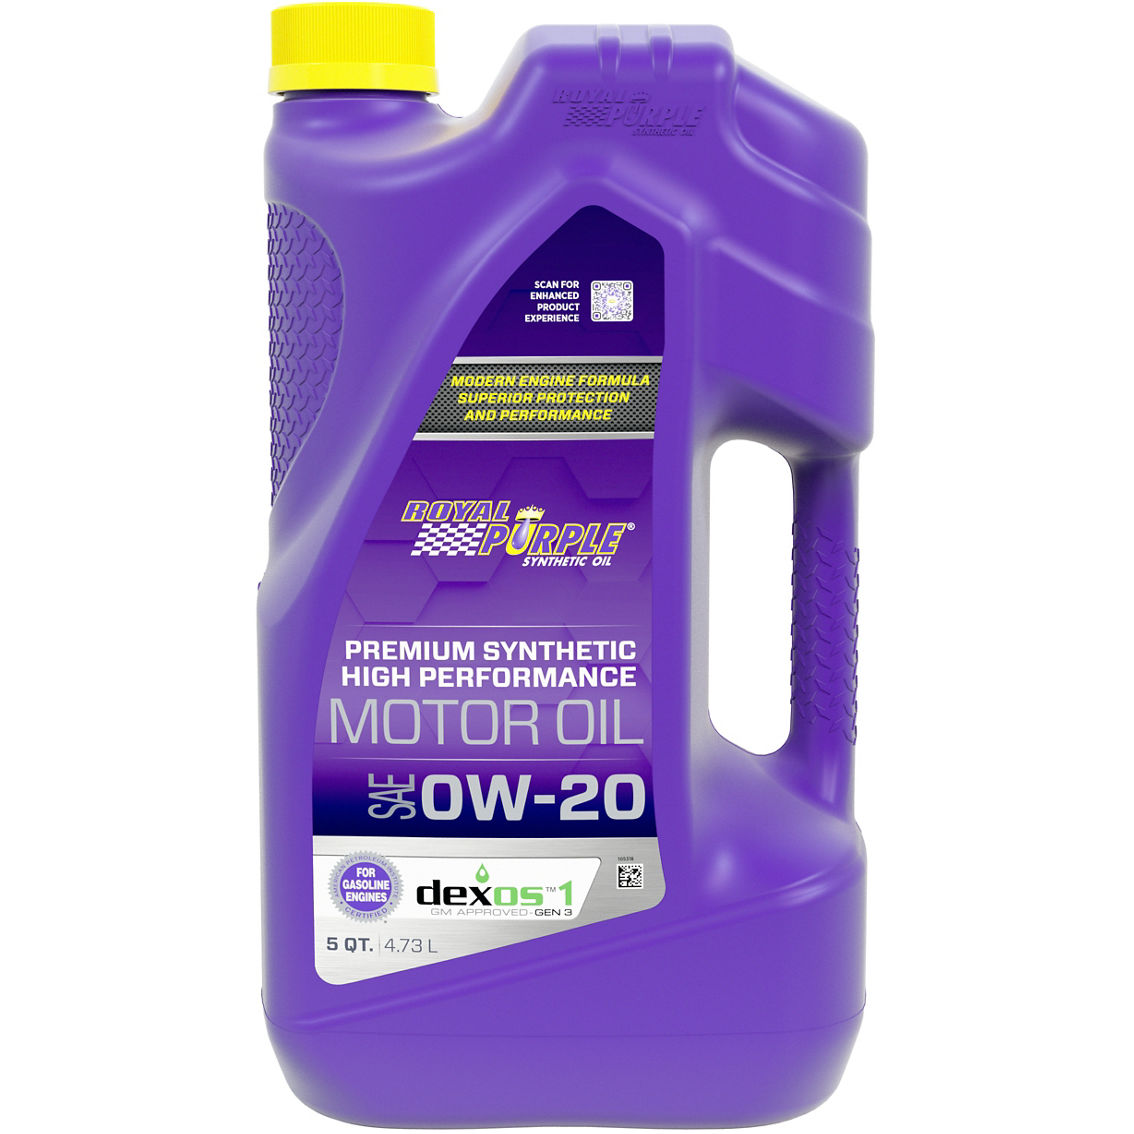 Royal Purple SAE 0W-20 High Performance Synthetic Motor Oil 5 qt. - Image 1 of 2